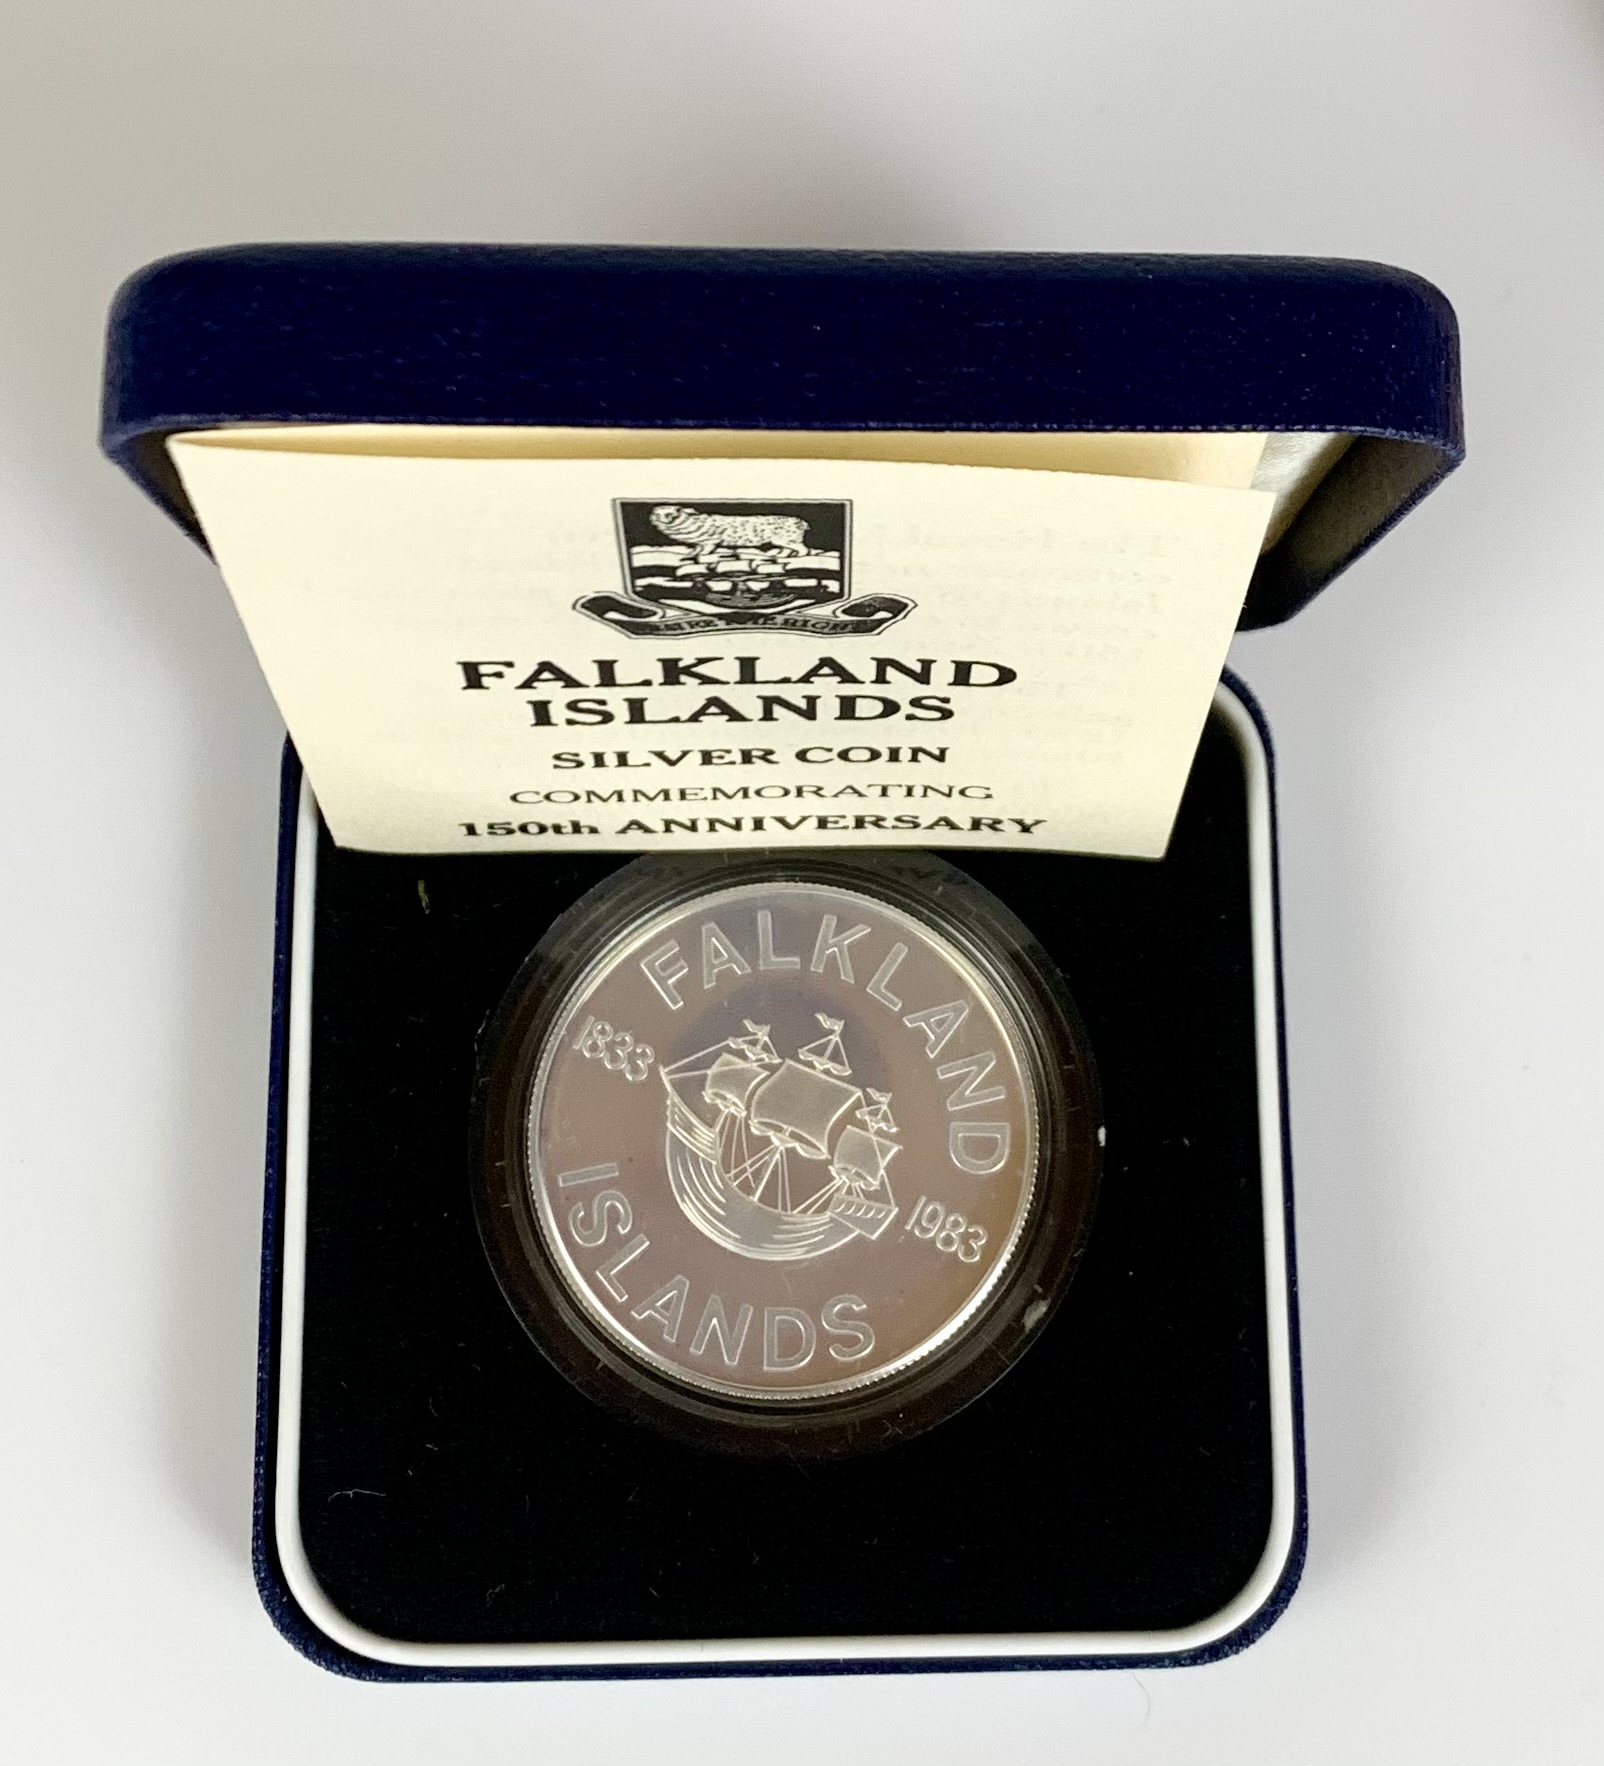 Boxed Royal Mint Falkland Islands Proof Silver Coin 1983 commemorating 150th Anniversary - Image 2 of 2